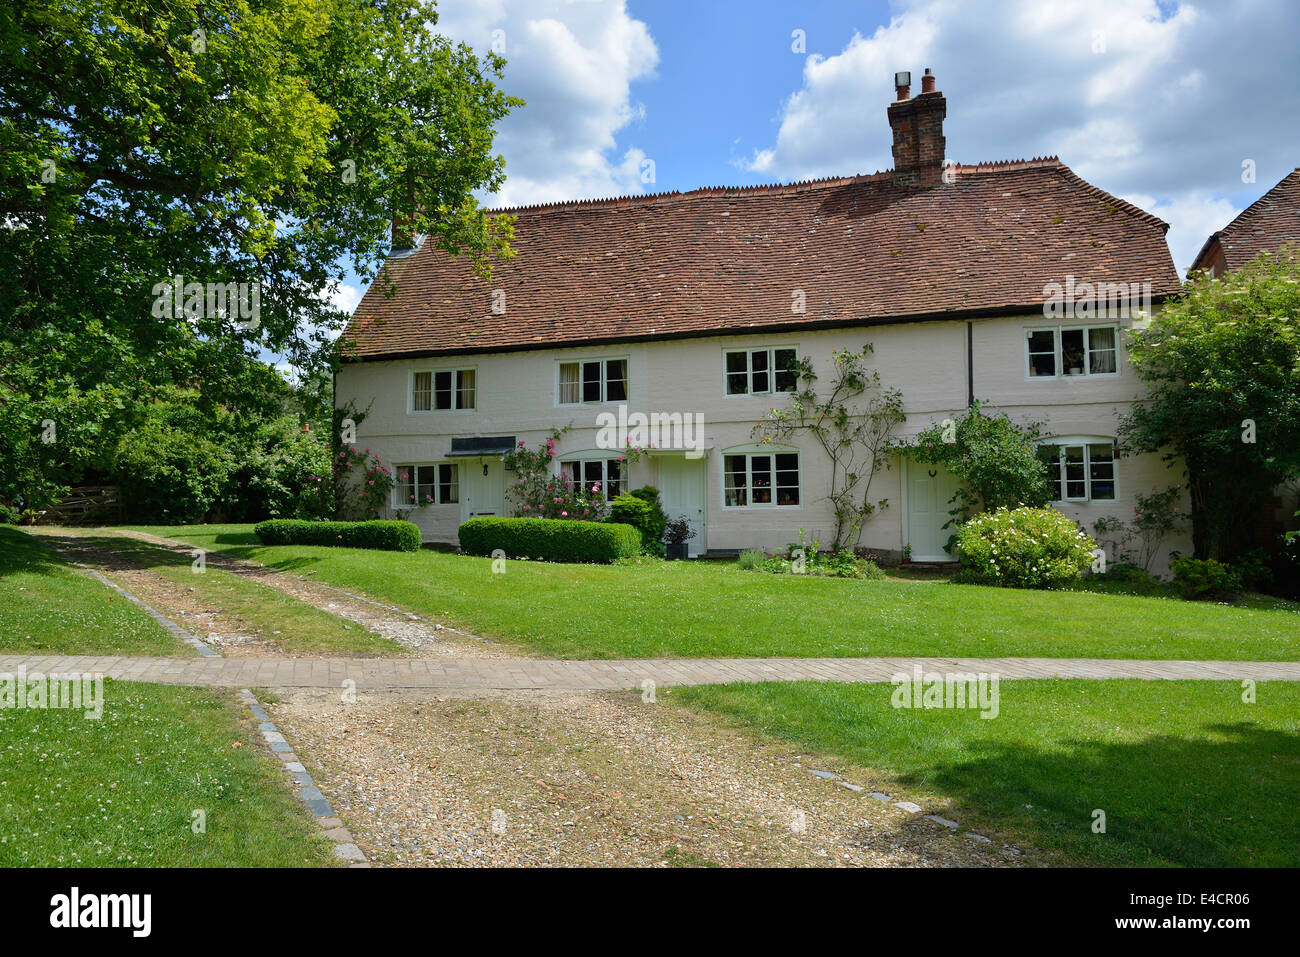 Country cottage on the green in front of the village church in Selborne, Hampshire, England, UK Stock Photo